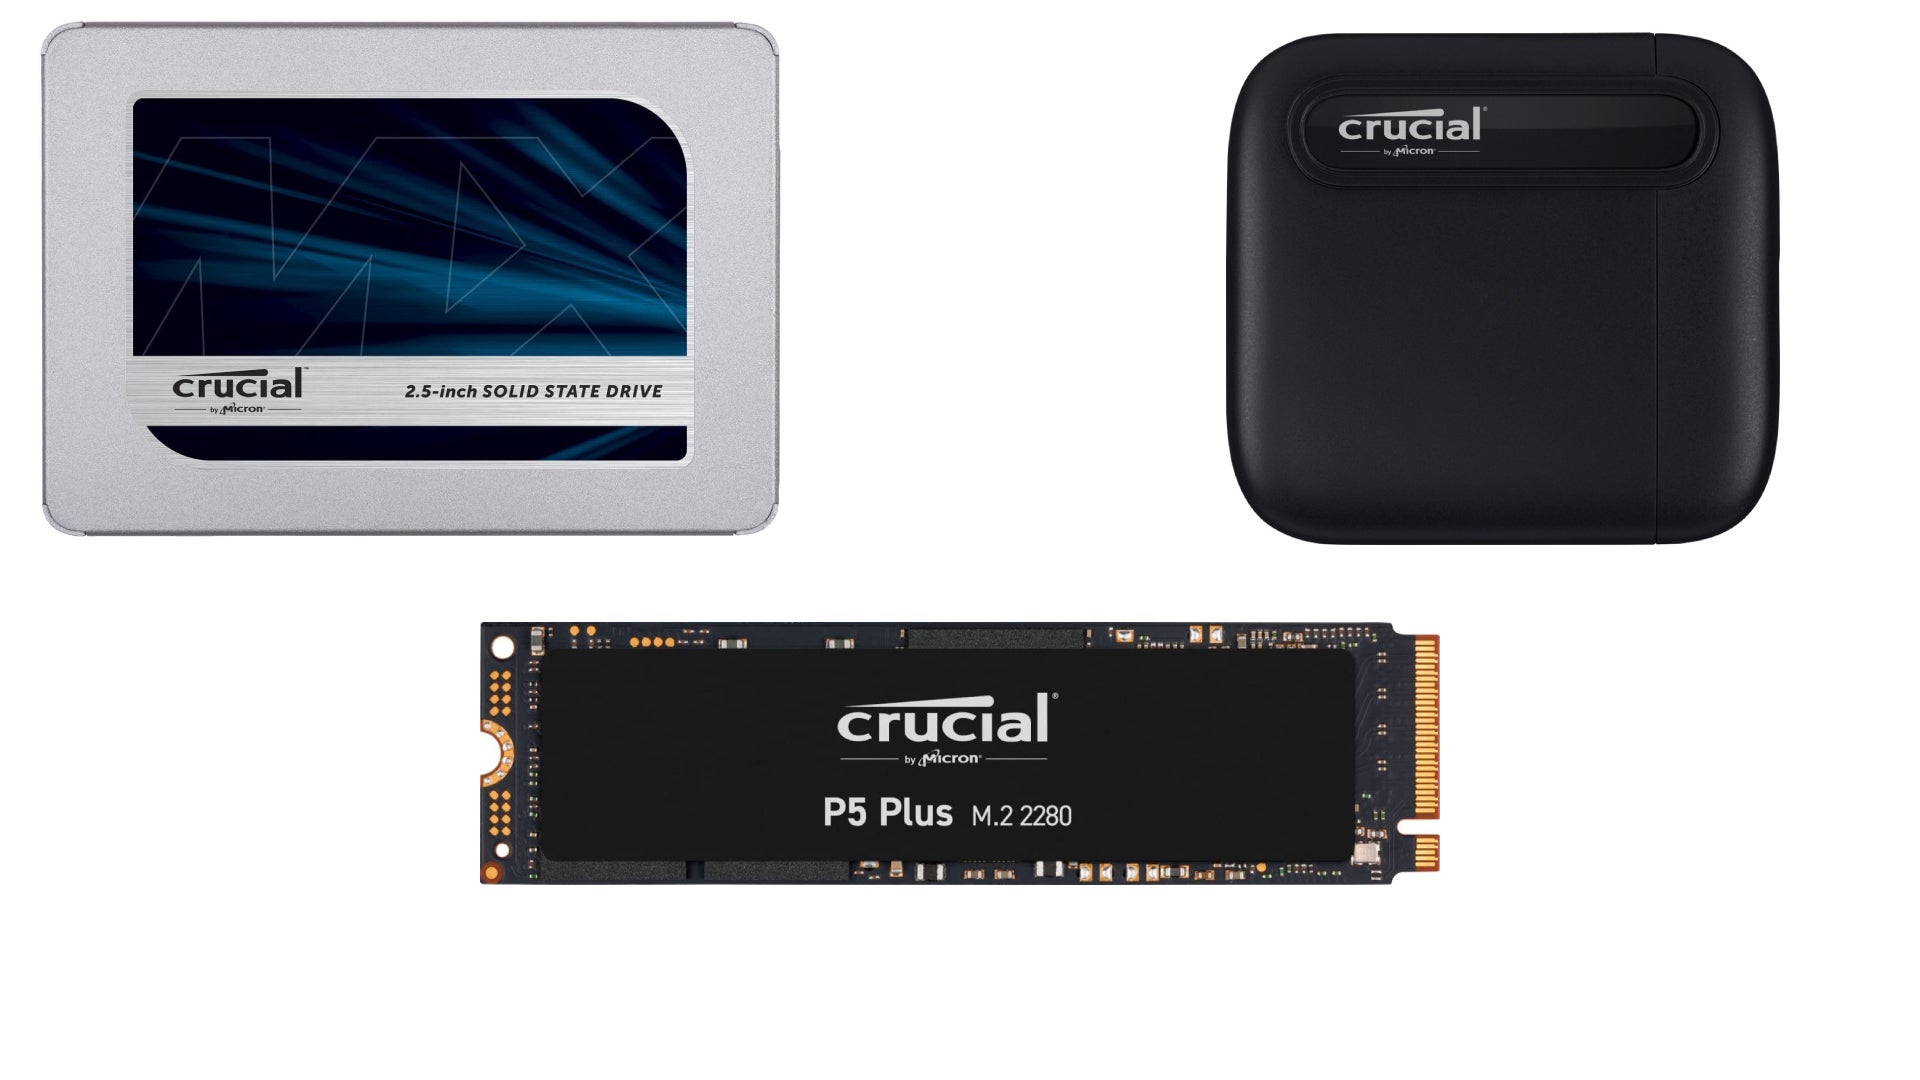 Image for Get the Crucial P5 Plus 1TB SSD at its lowest price on Amazon